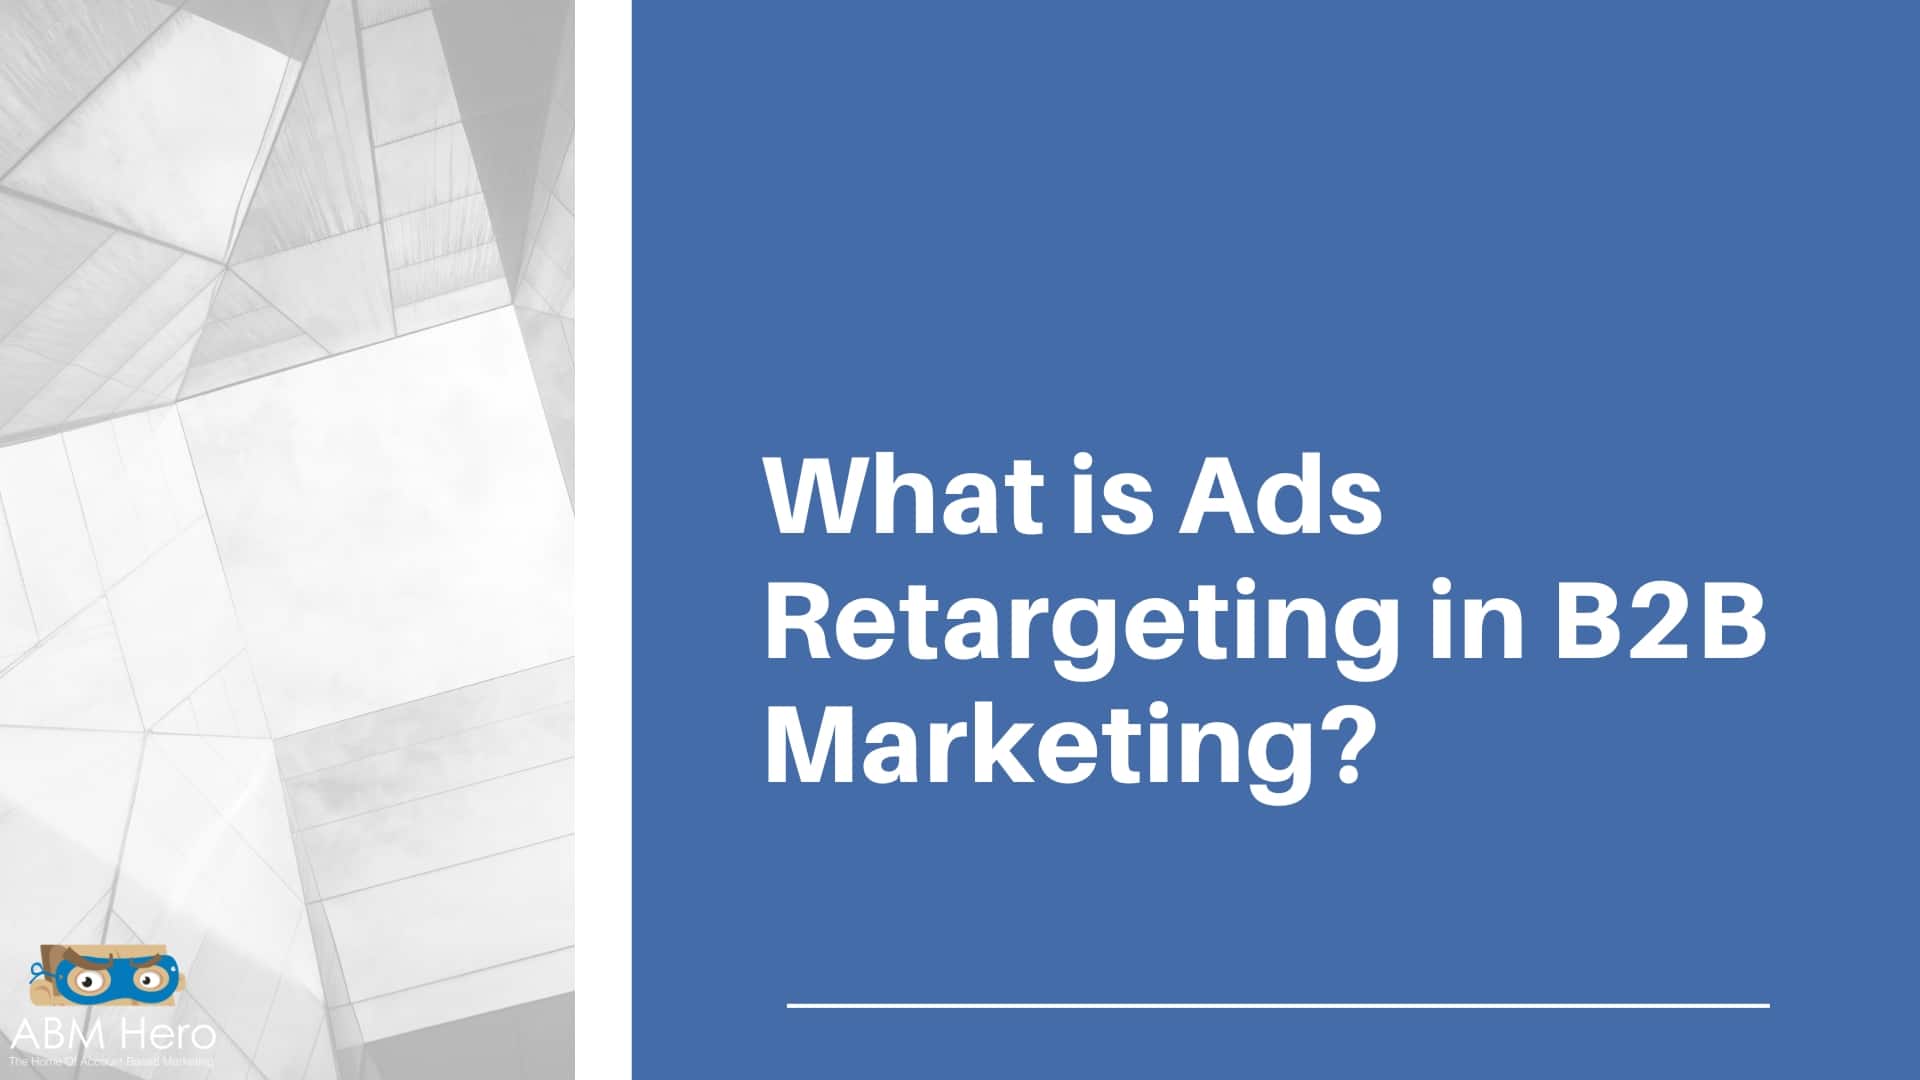 You are currently viewing What is Ads Retargeting in B2B Marketing?